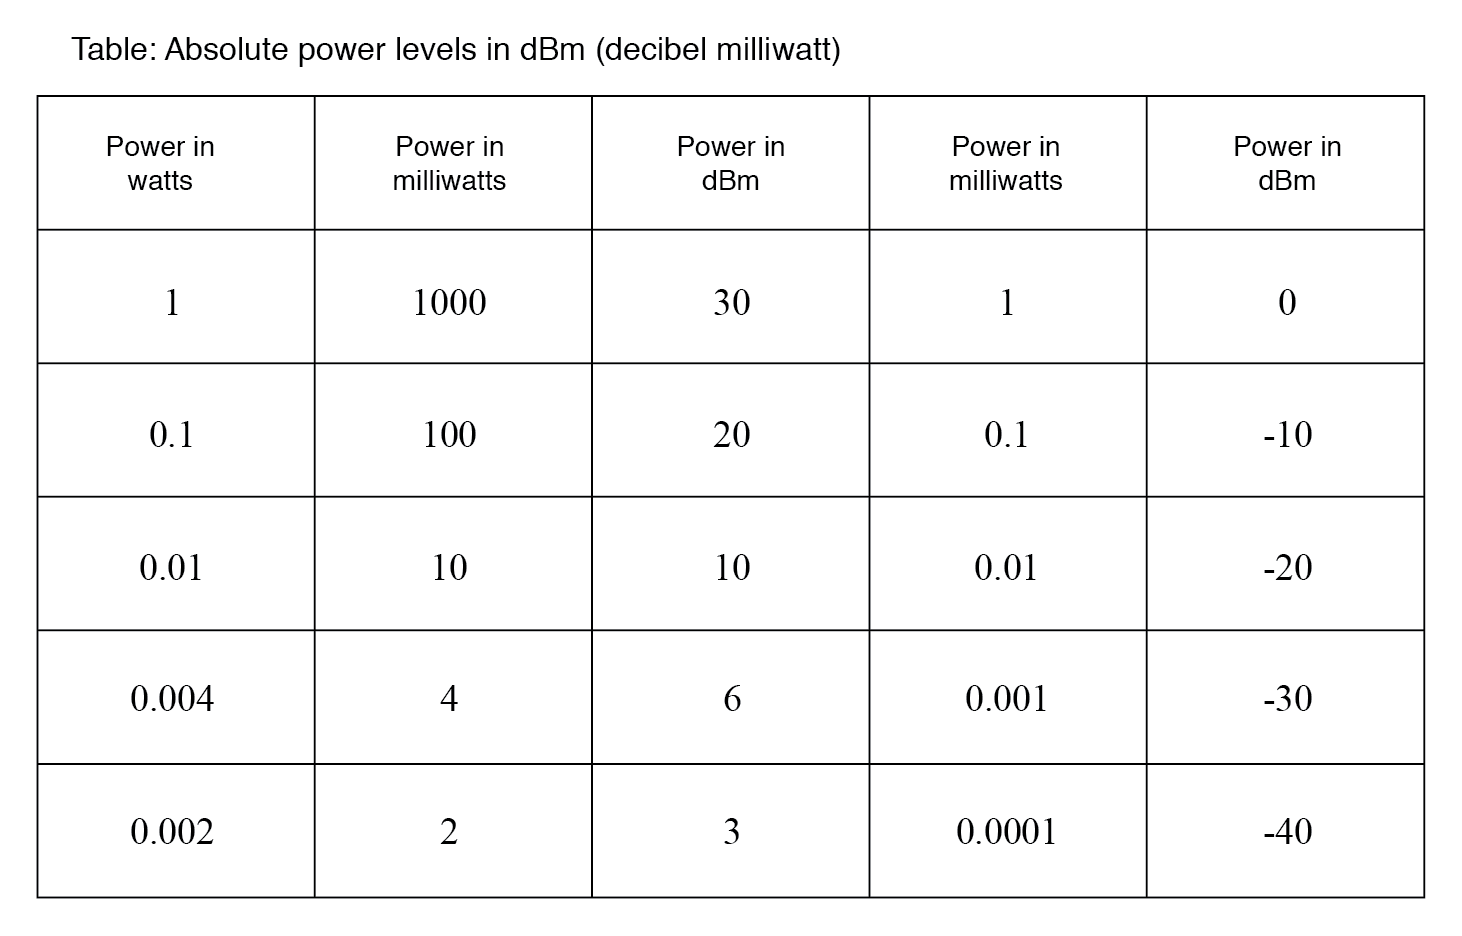 Absolute power levels in dBm (decibels referenced to 1 milliwatt).